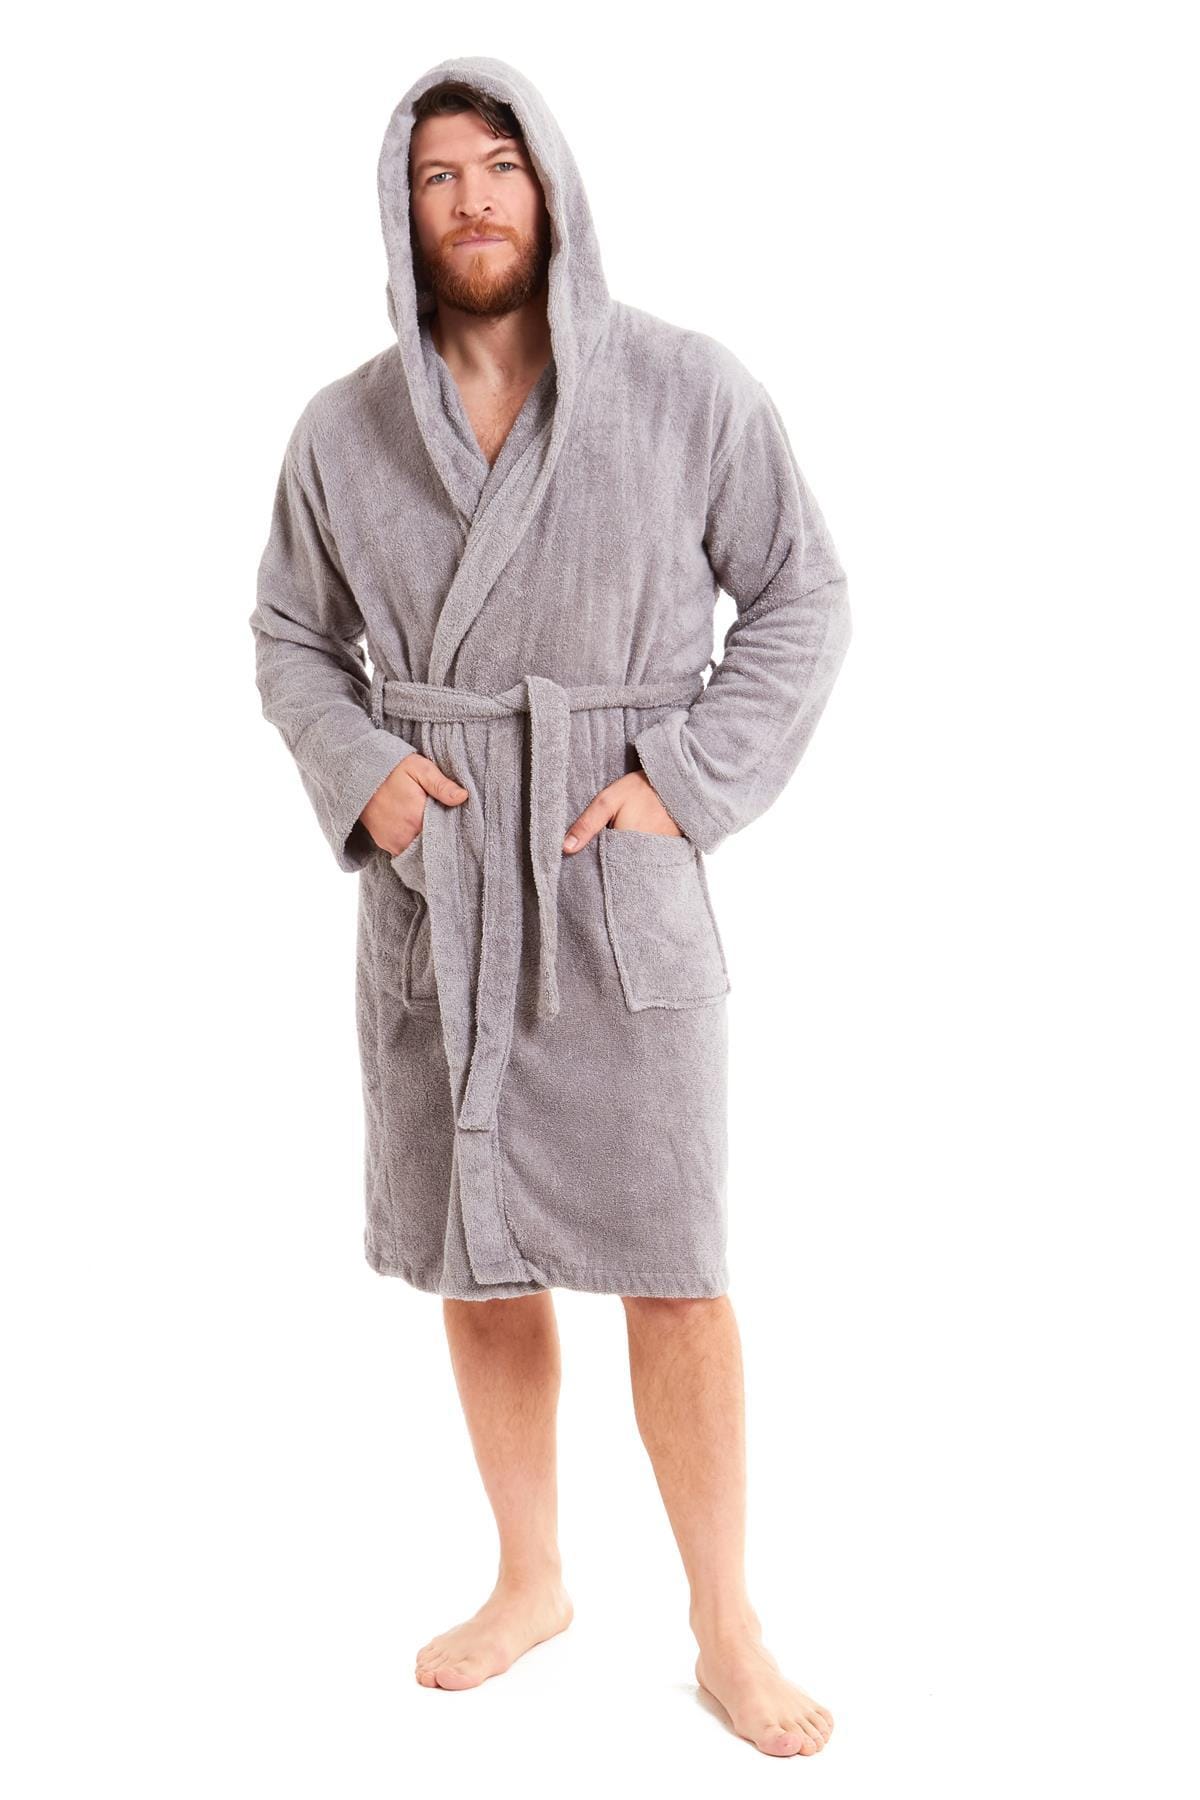 mens luxury bamboo hooded towelling robe medium large grey daisy dreamer dressing gown 28614167658568